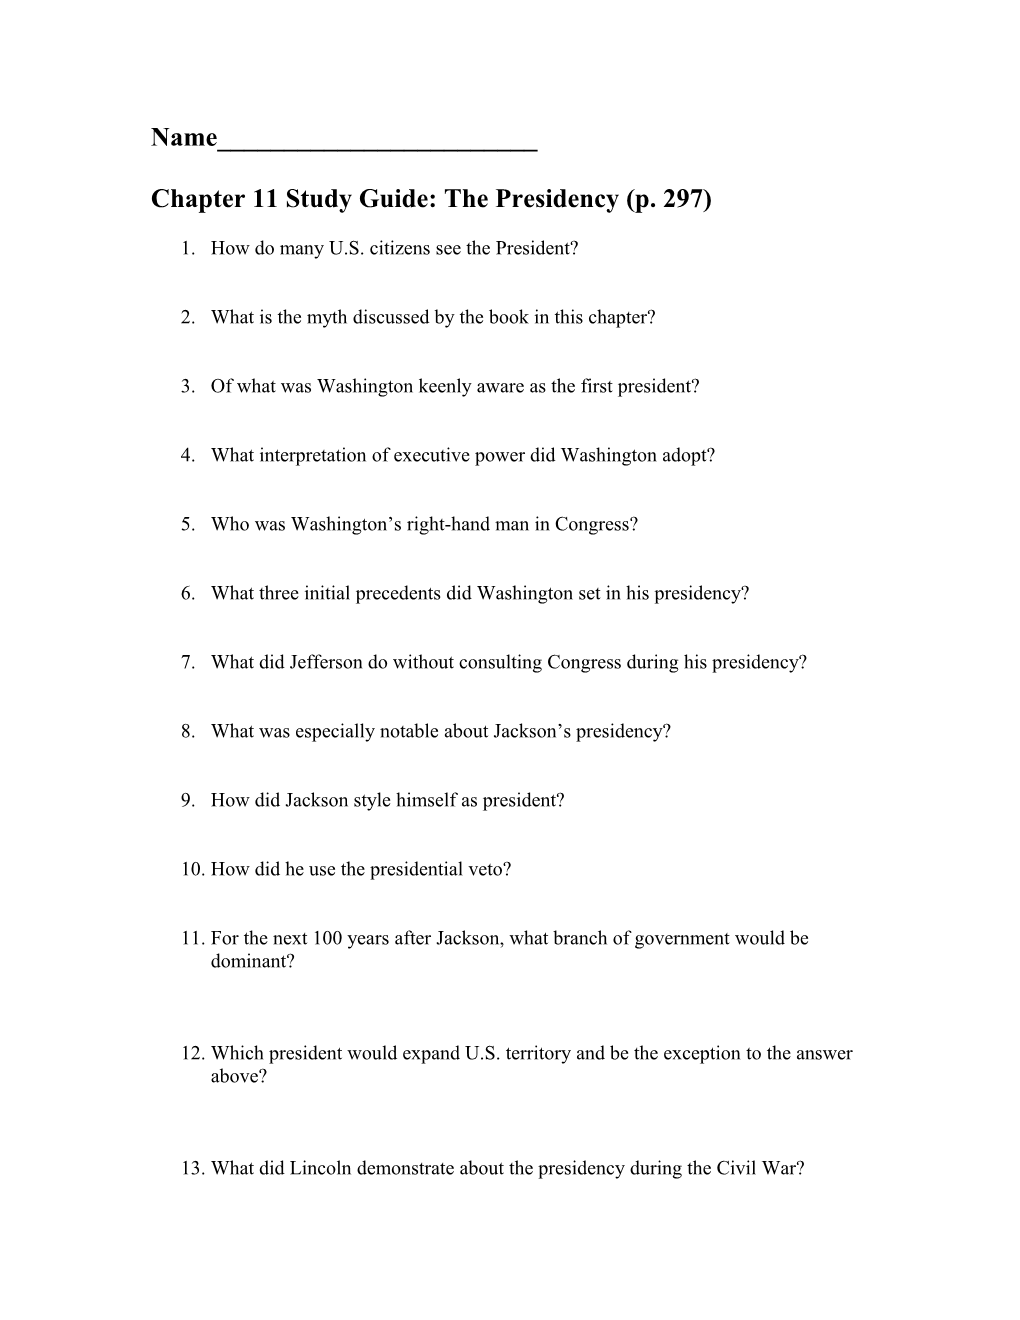 Chapter 11 Study Guide: the Presidency (P. 297)